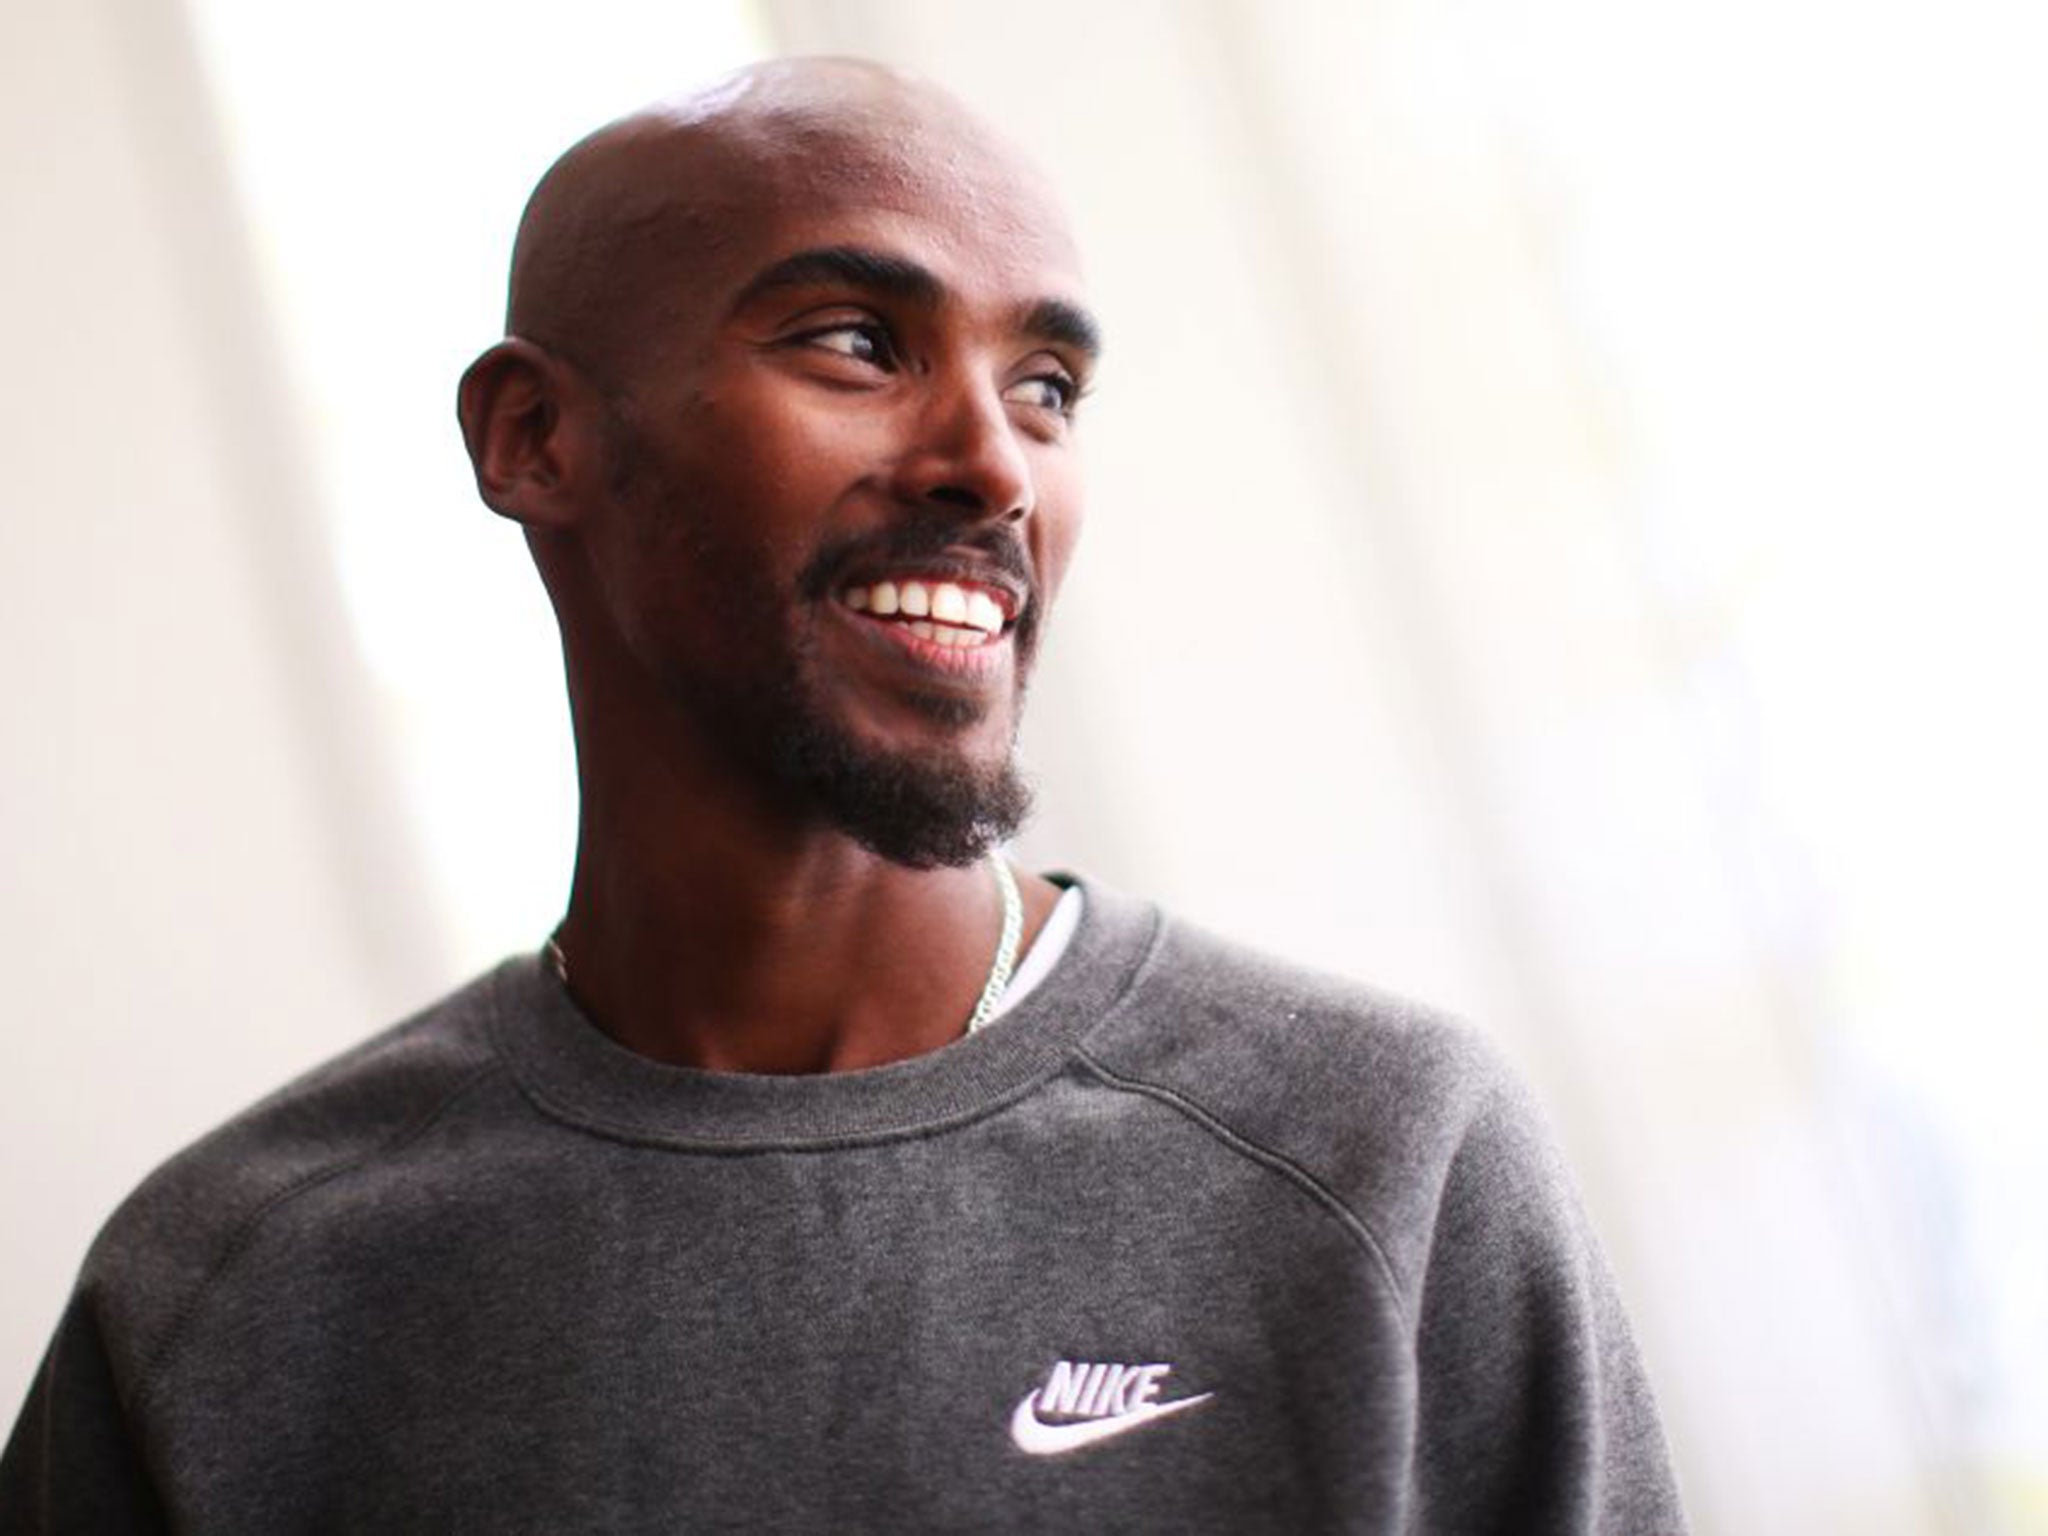 Mo Farah attended training camps where Jama Aden worked